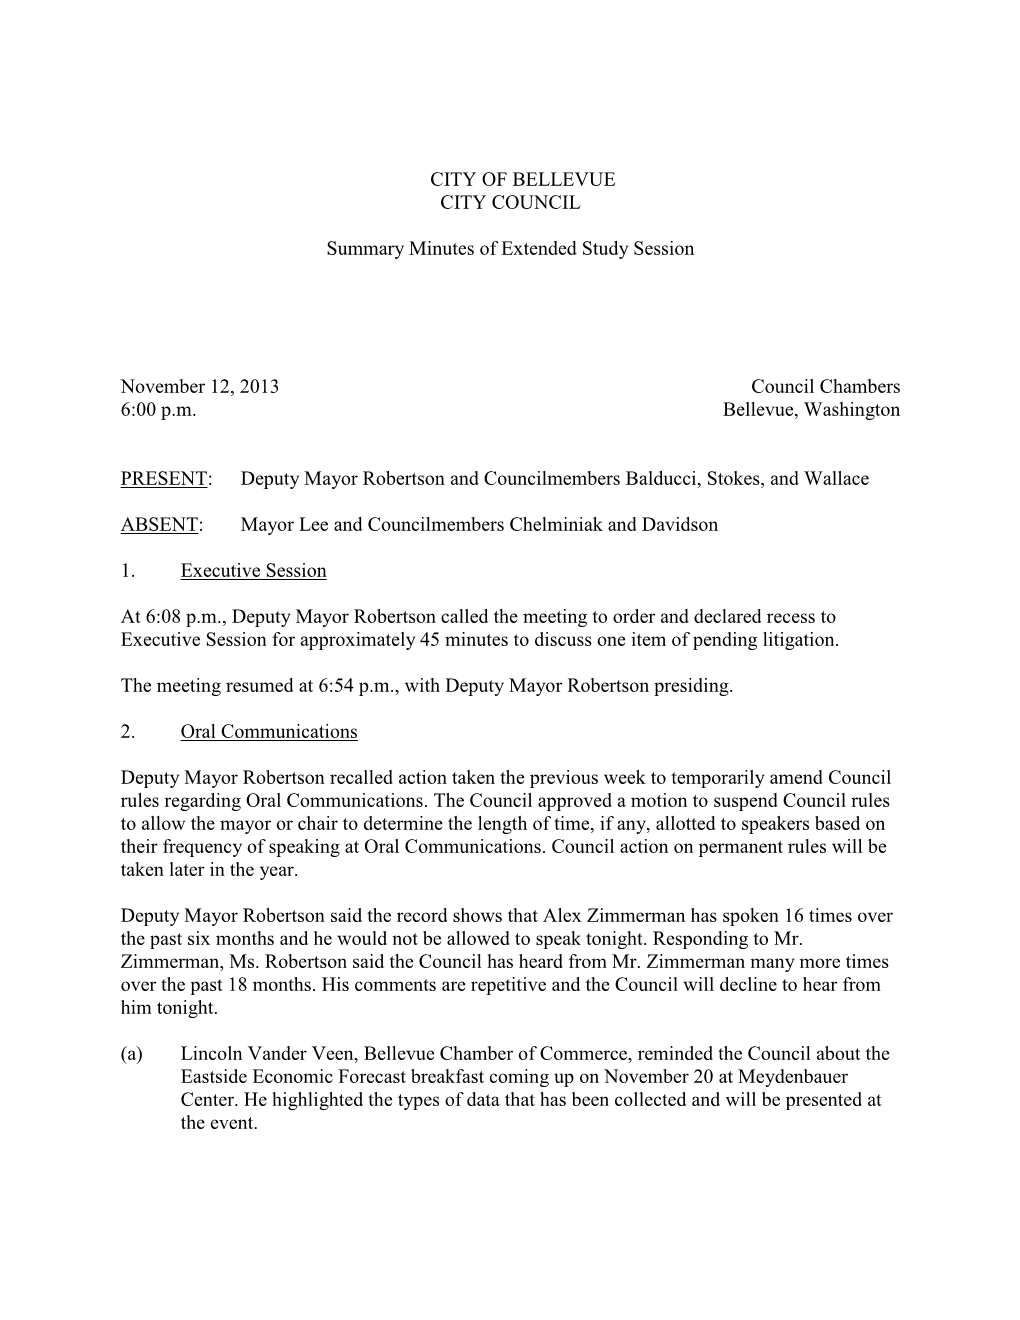 CITY of BELLEVUE CITY COUNCIL Summary Minutes of Extended